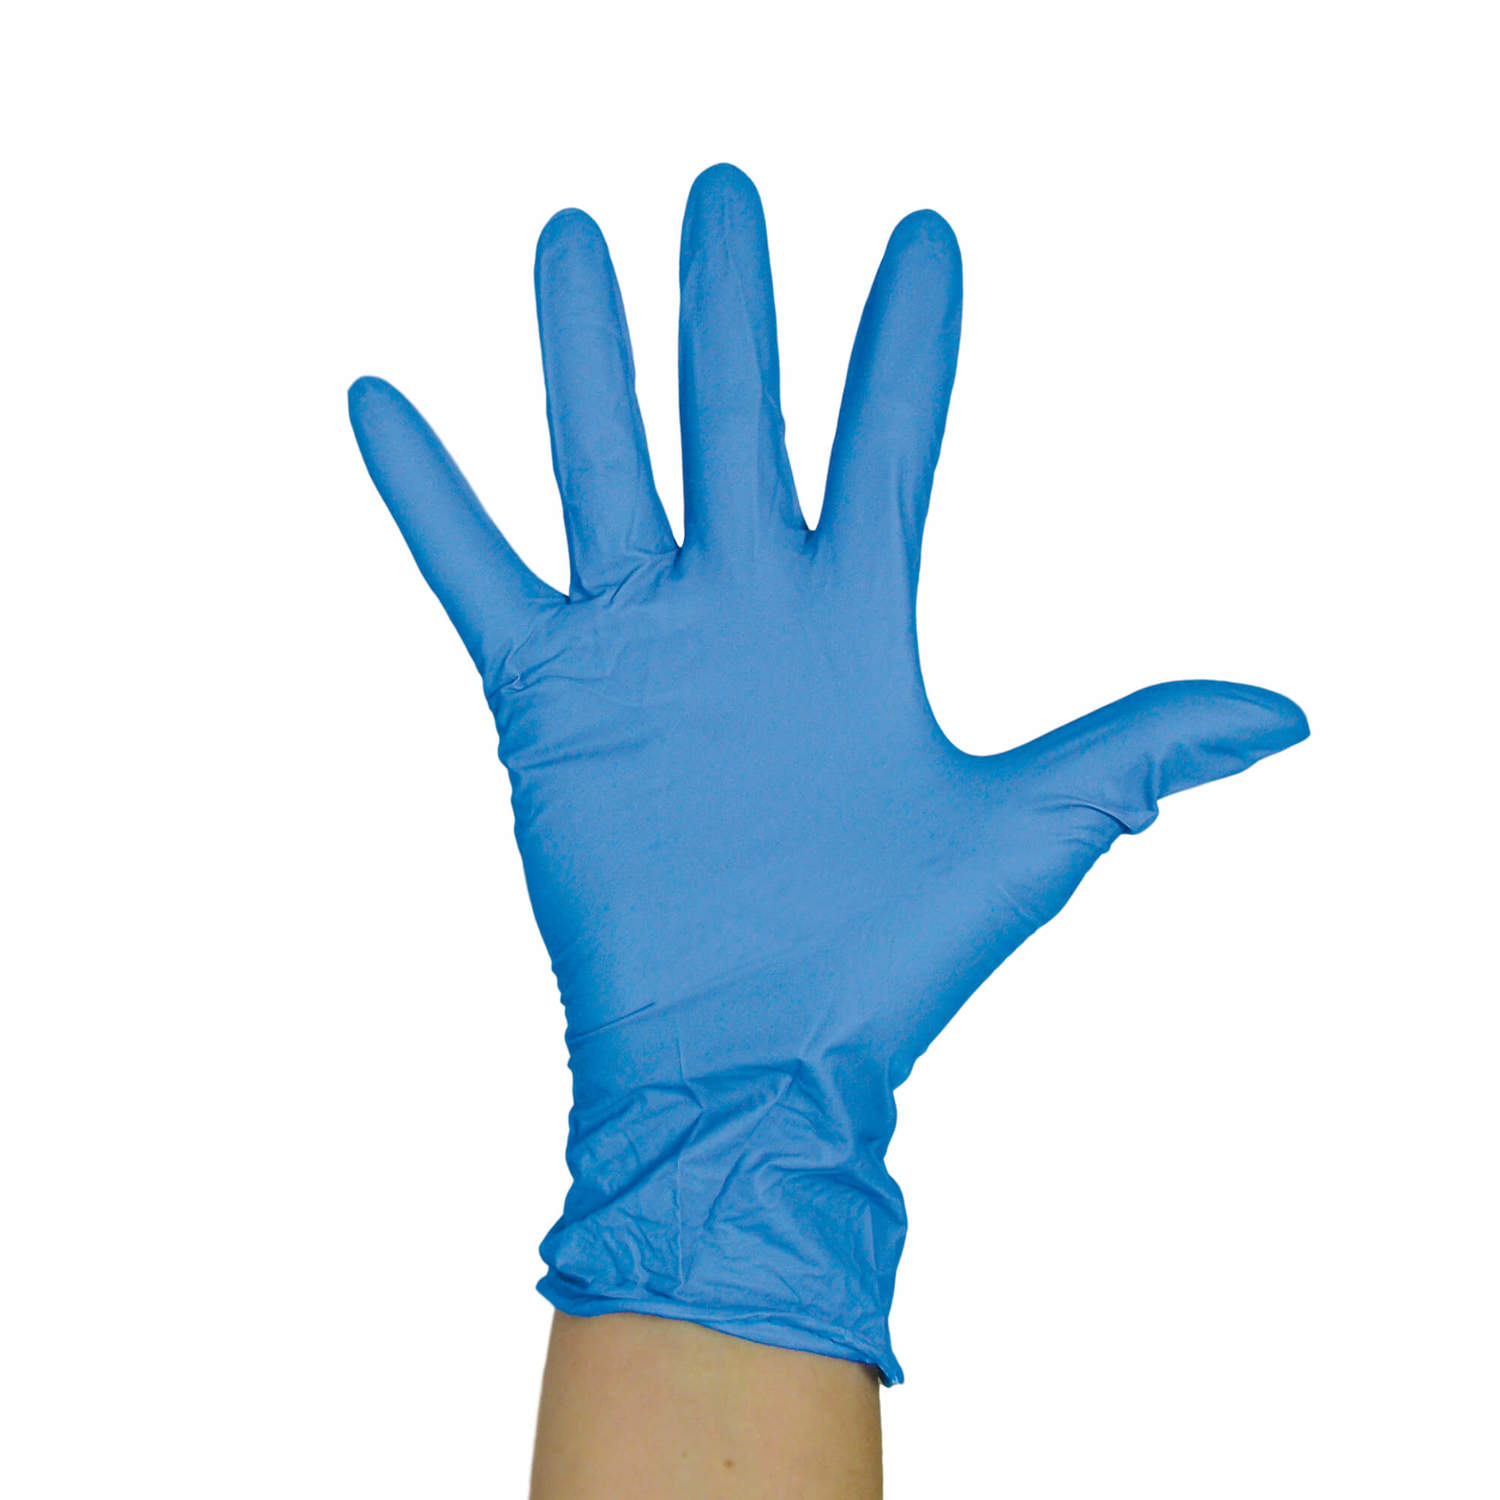 Can we use wholesale nitrile gloves in food industry?